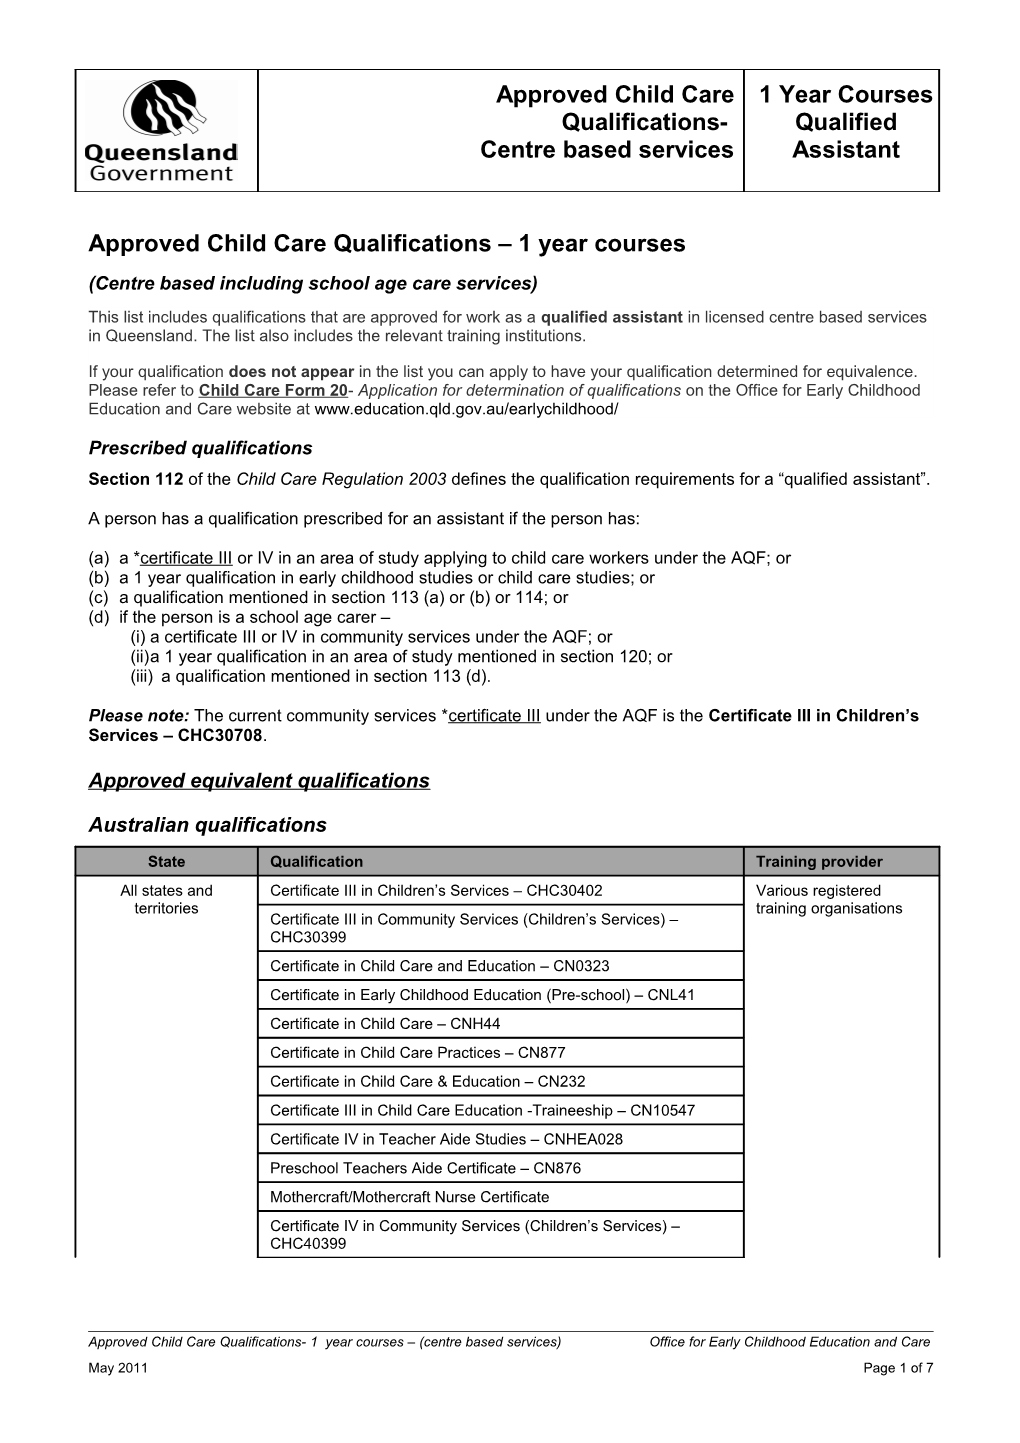 Approved Child Care Qualifications - 1 Year Courses